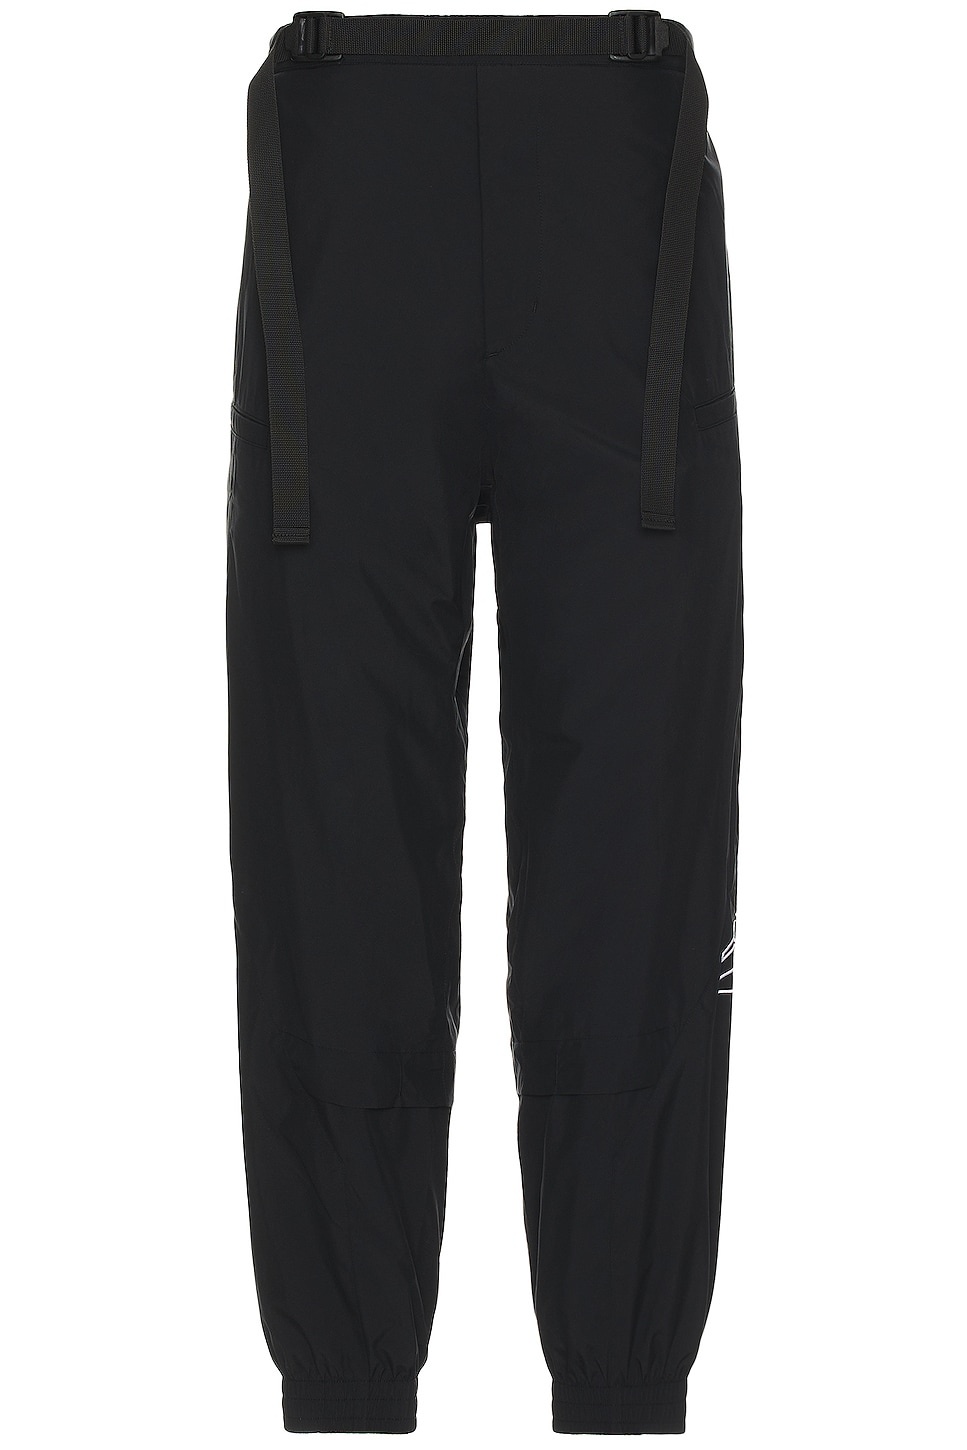 P53-ws 2l Gore-tex Windstopper Insulated Vent Pant - 1